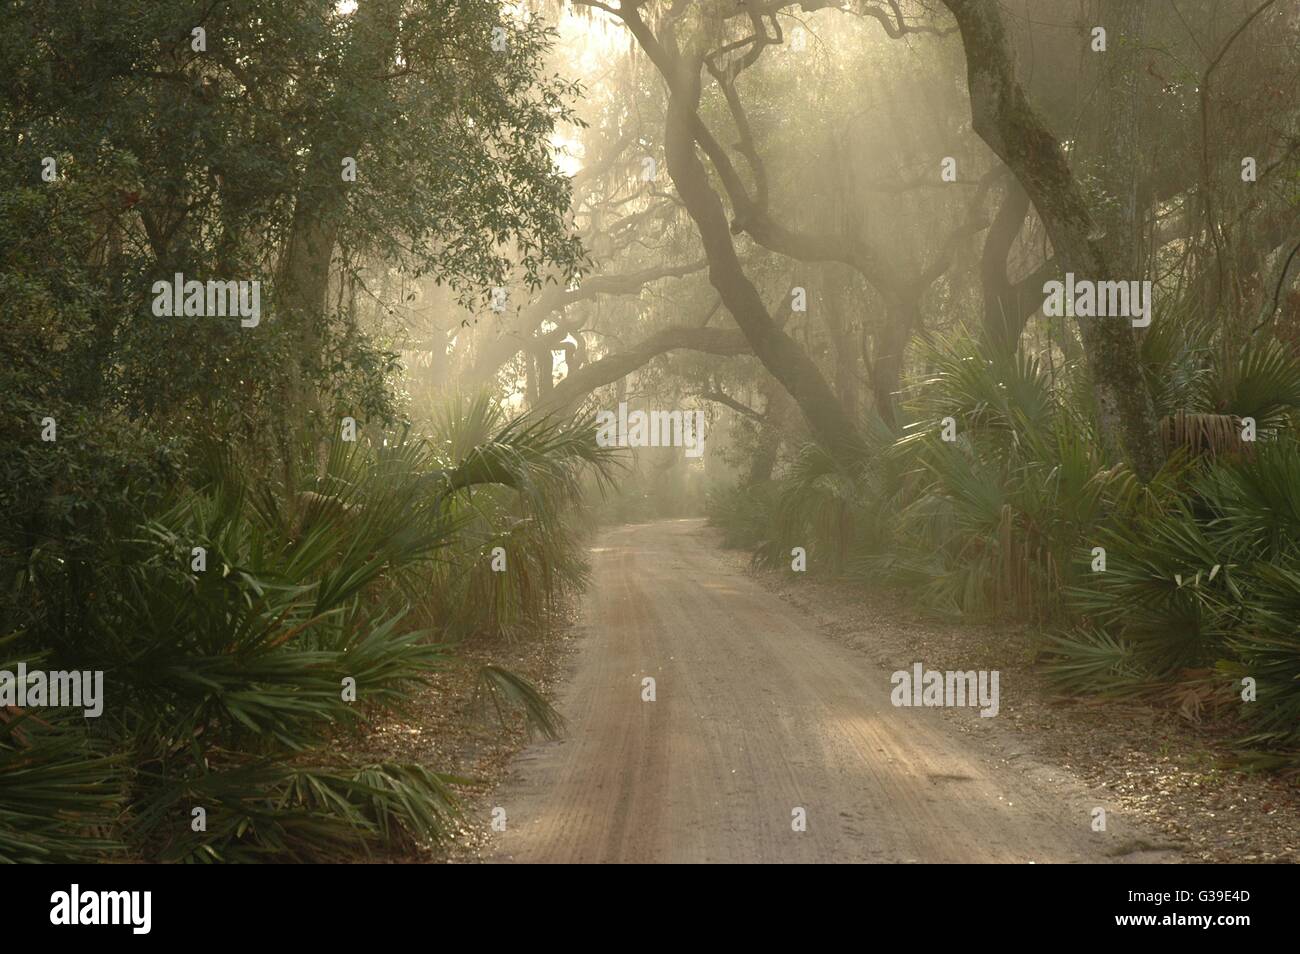 The main road passing through a tunnel of Live Oak trees and maritime forest on Cumberland Island National Seashore in Georgia. Stock Photo